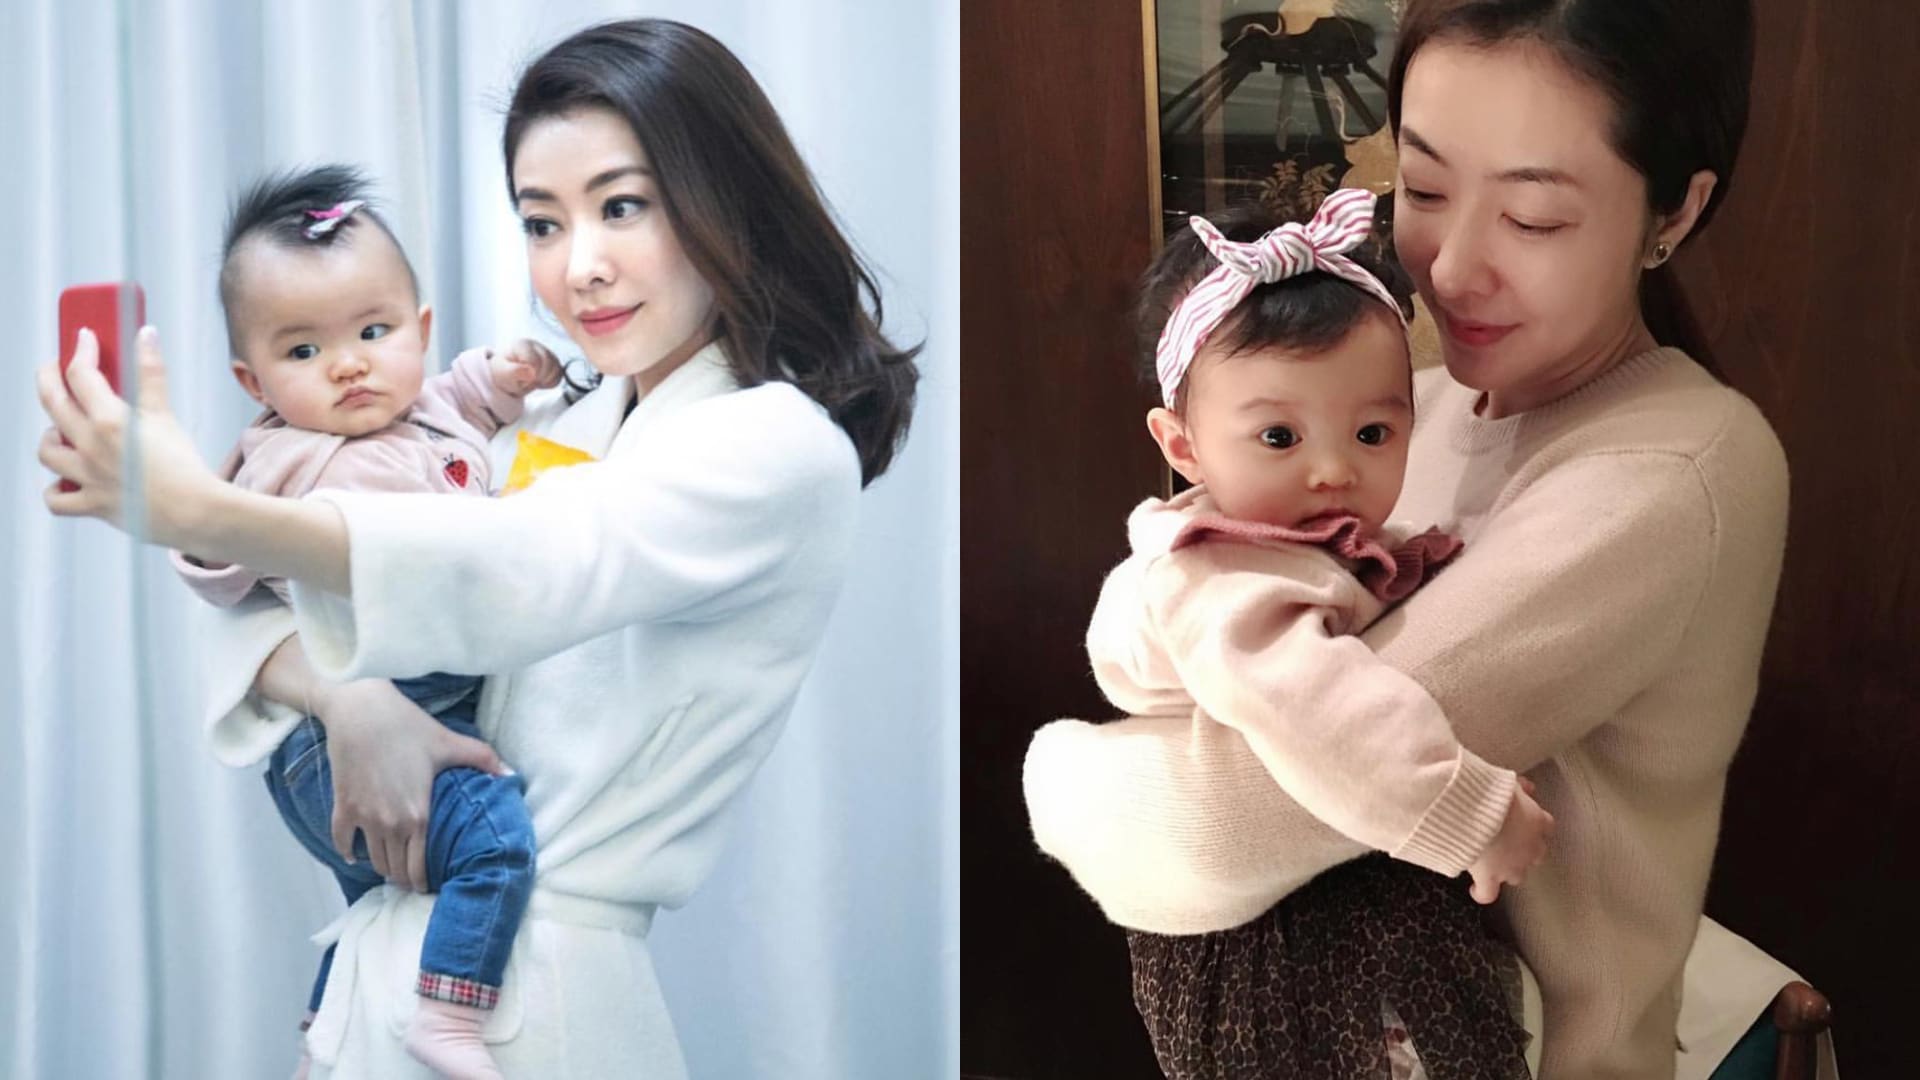 Netizens Have A Funny Observation To Make About Lynn Hung’s Twin Daughters